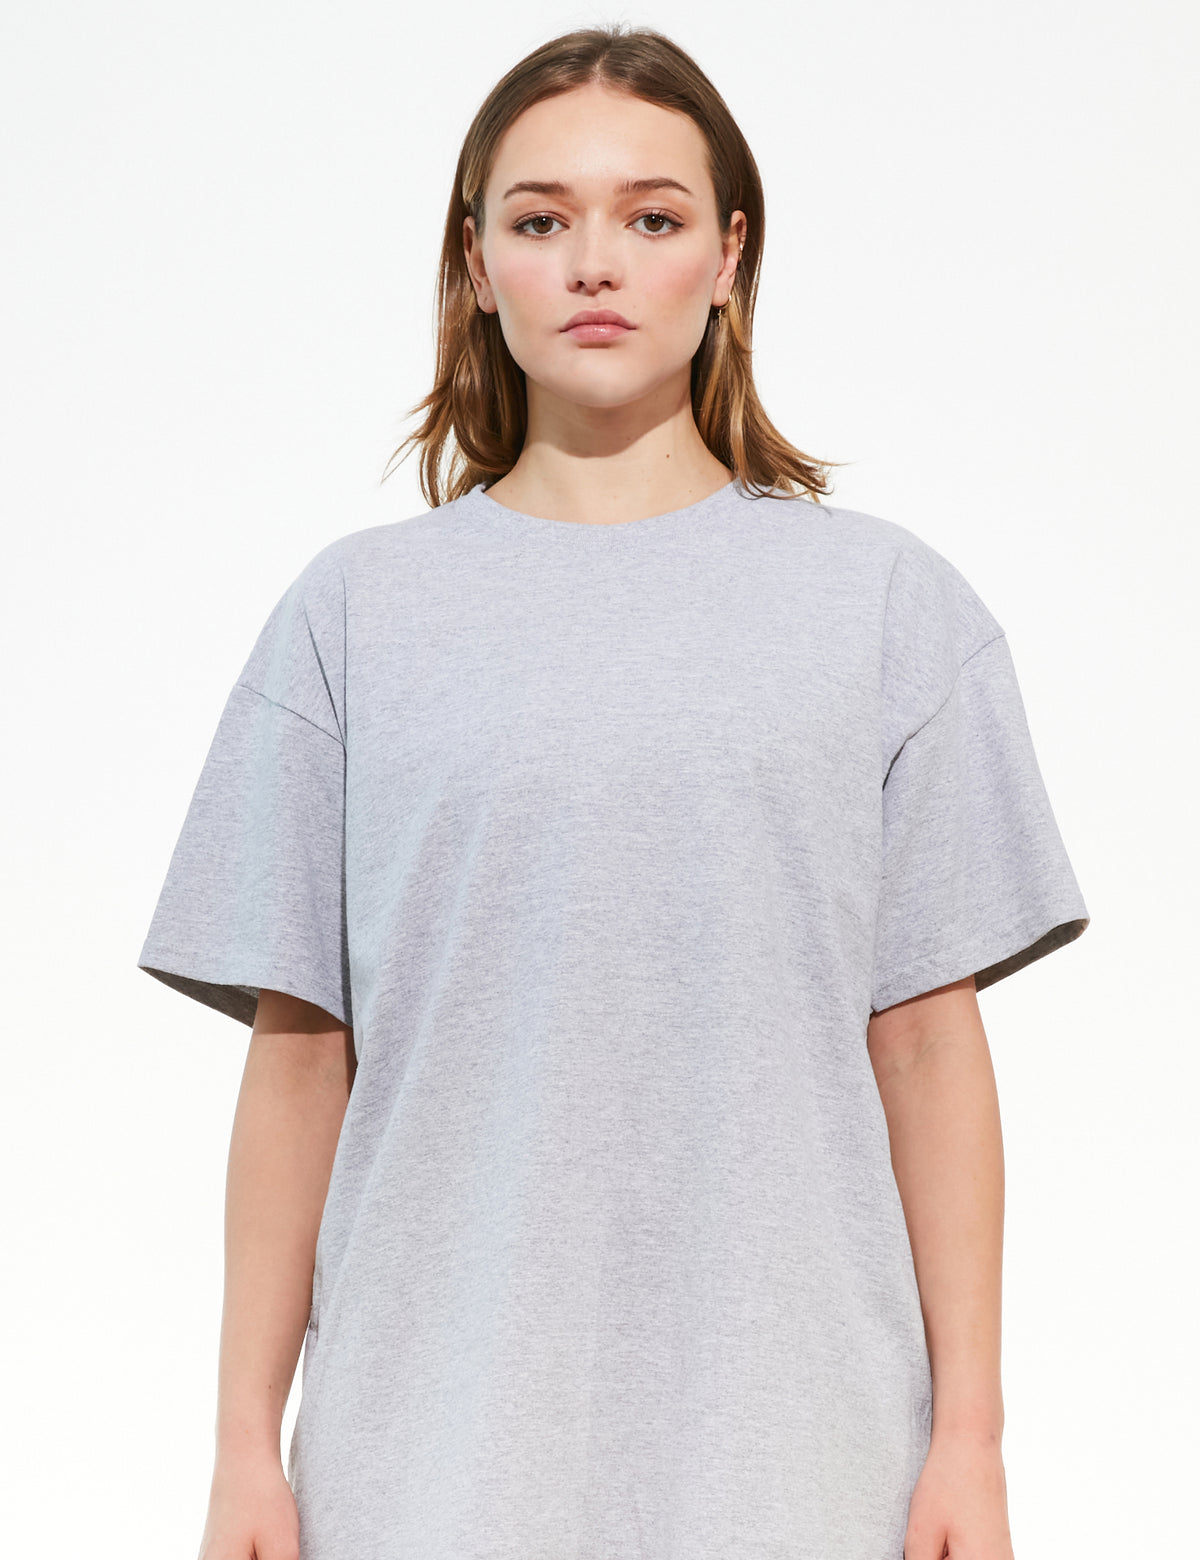 CONNECT GREY TEE !! NEW STOCK !!